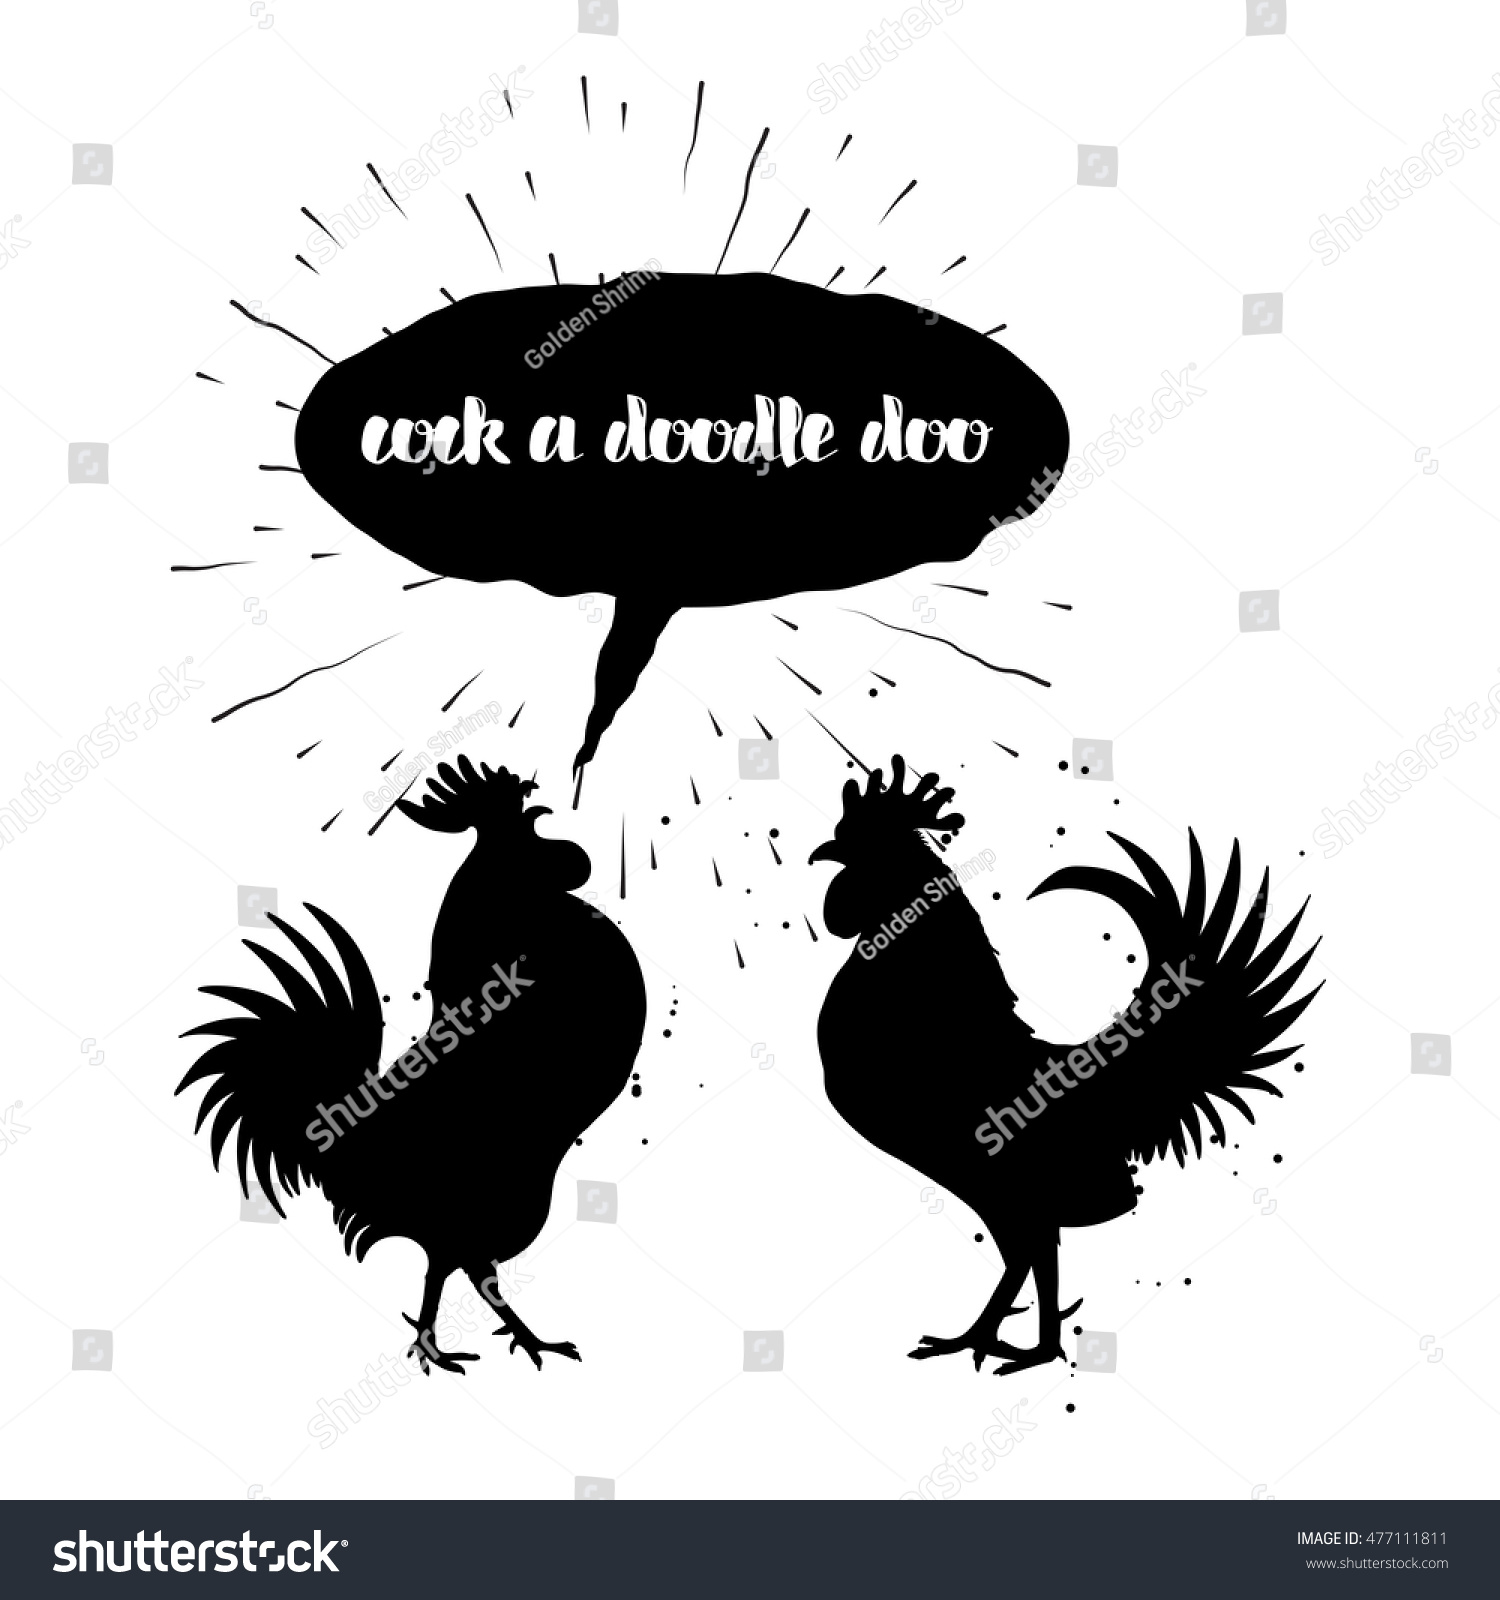 SVG of Cock a doodle doo calligraphy writing in speech bubble. Hipster design with roosters. Hand drawing morning roosters birds on white background. svg